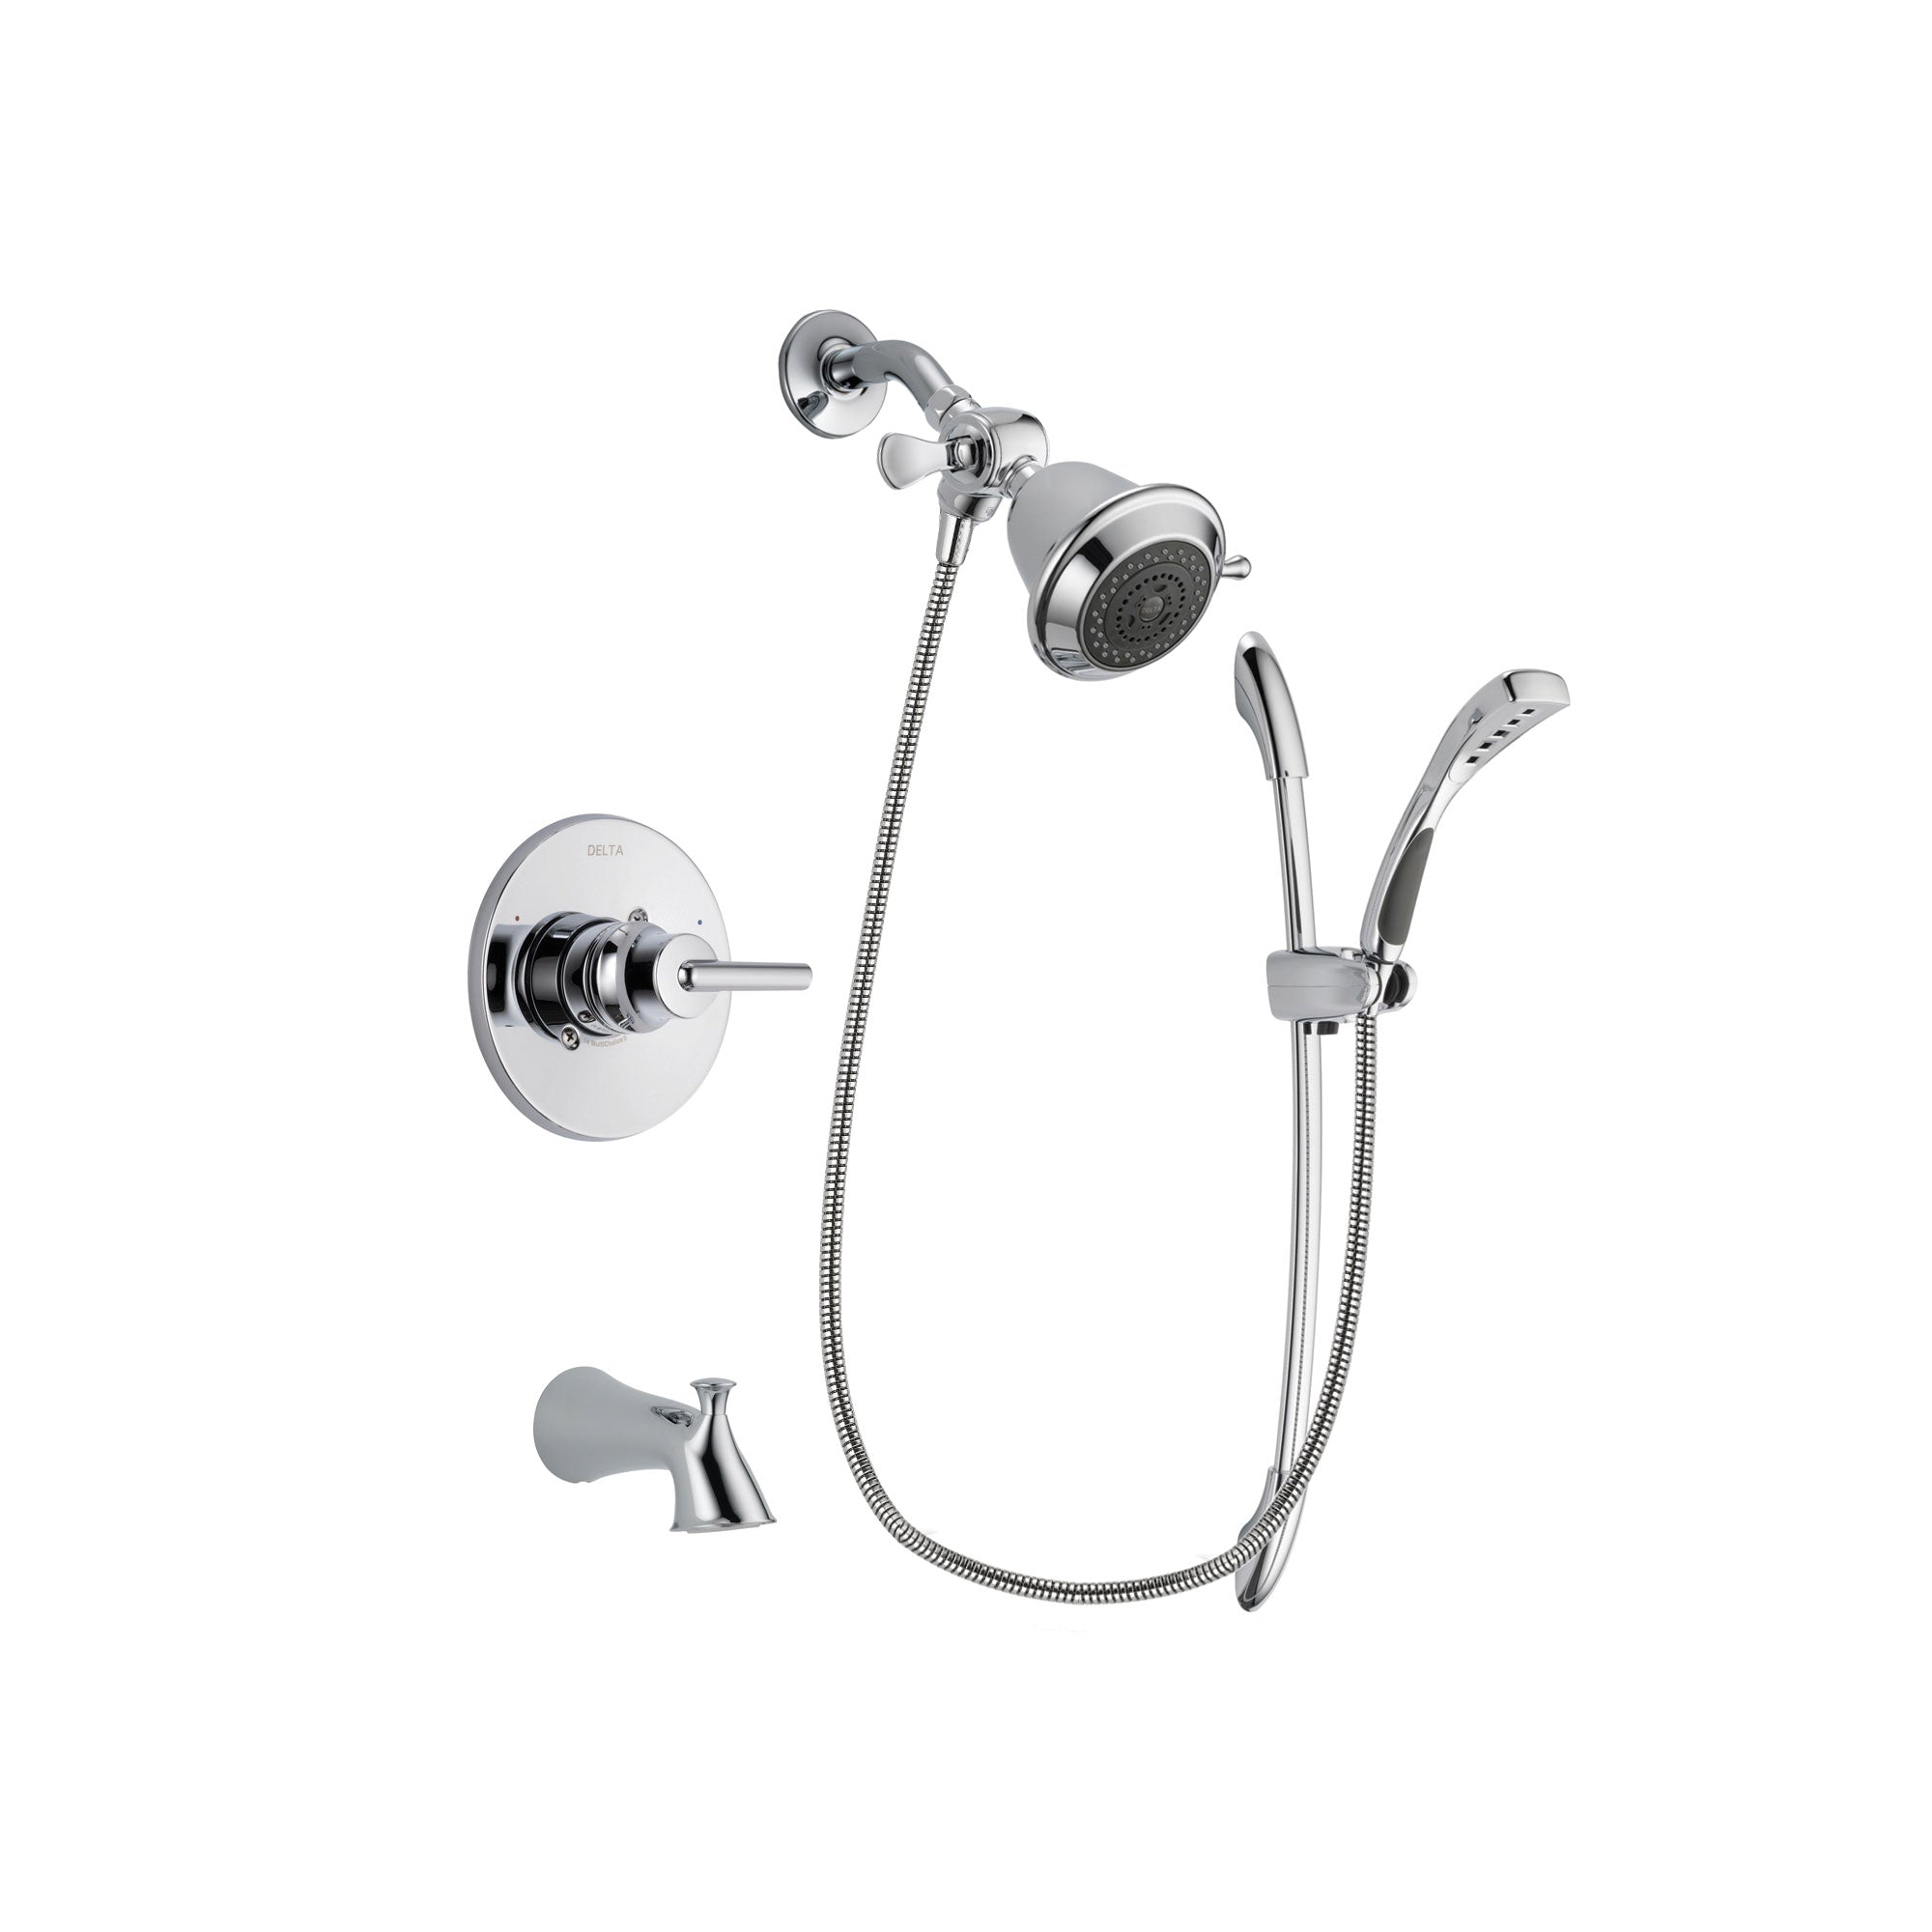 Delta Trinsic Chrome Finish Tub and Shower Faucet System Package with Shower Head and Handheld Shower with Slide Bar Includes Rough-in Valve and Tub Spout DSP0437V